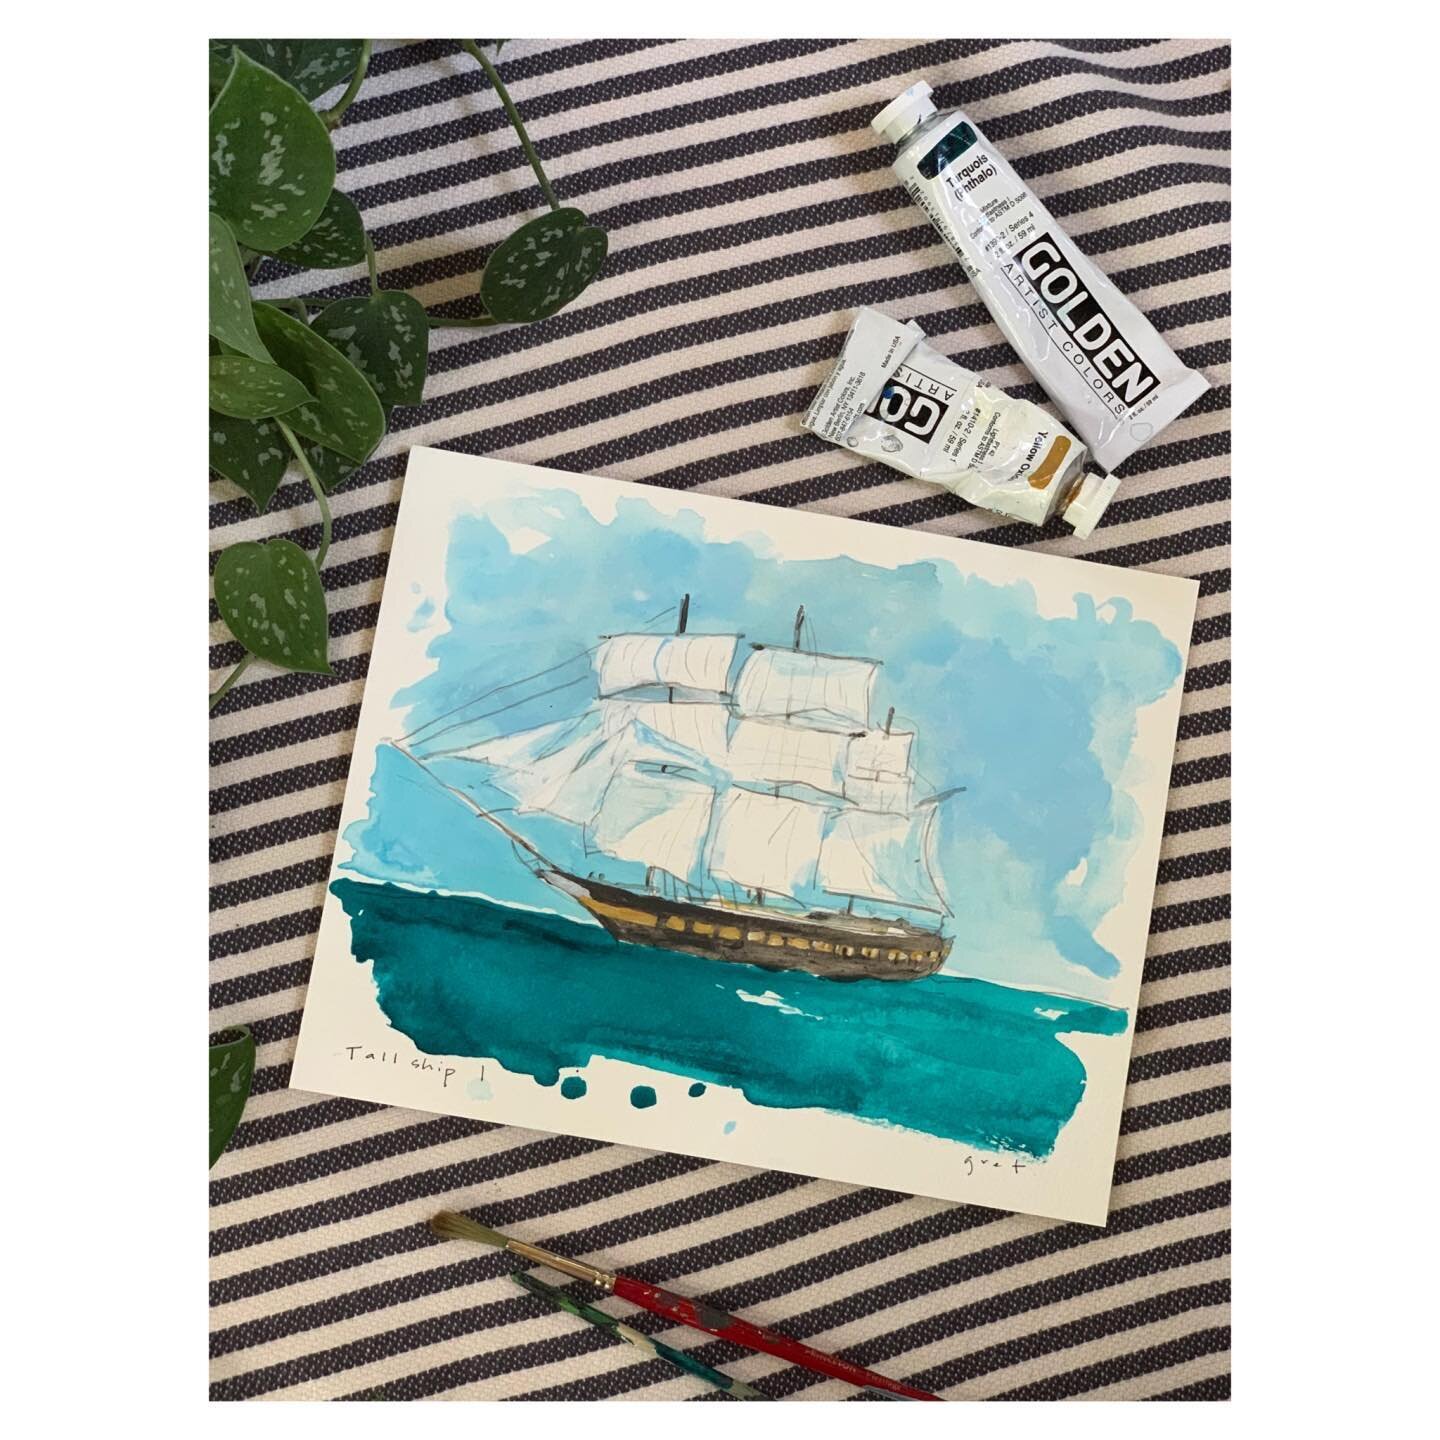 One of the 8x10 Tall Ship paintings still available from the collection ⚓️
Acrylic paint on 300 lb watercolor paper (ie: thick)
 link in bio☝🏼 (gretmackintosh.com)
.
.
.
#gretmackintosh #tallships #bygret #arylicpainting #charlestonartist #coastalli